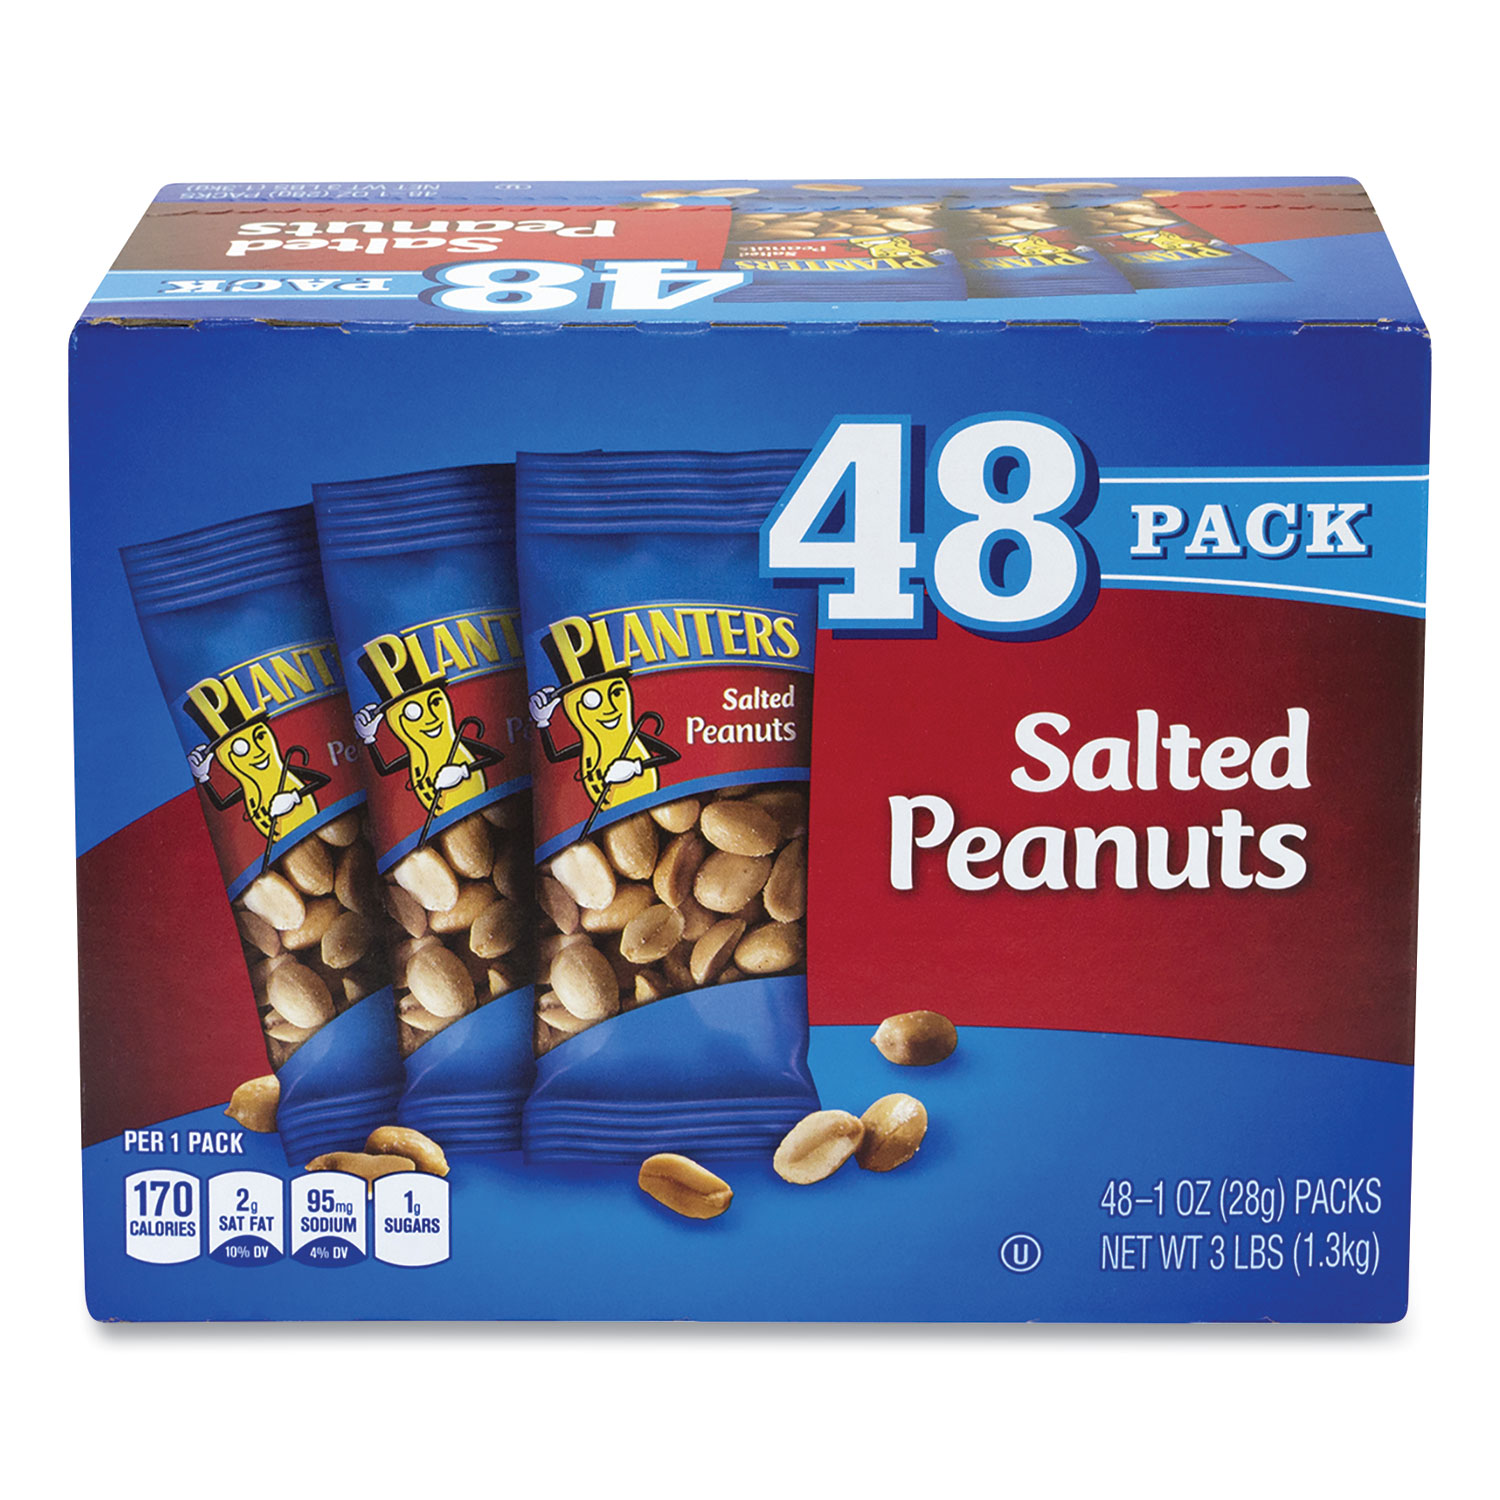  Planters 7791 Salted Peanuts, 1 oz Pack, 48/Box, Free Delivery in 1-4 Business Days (GRR22000760) 